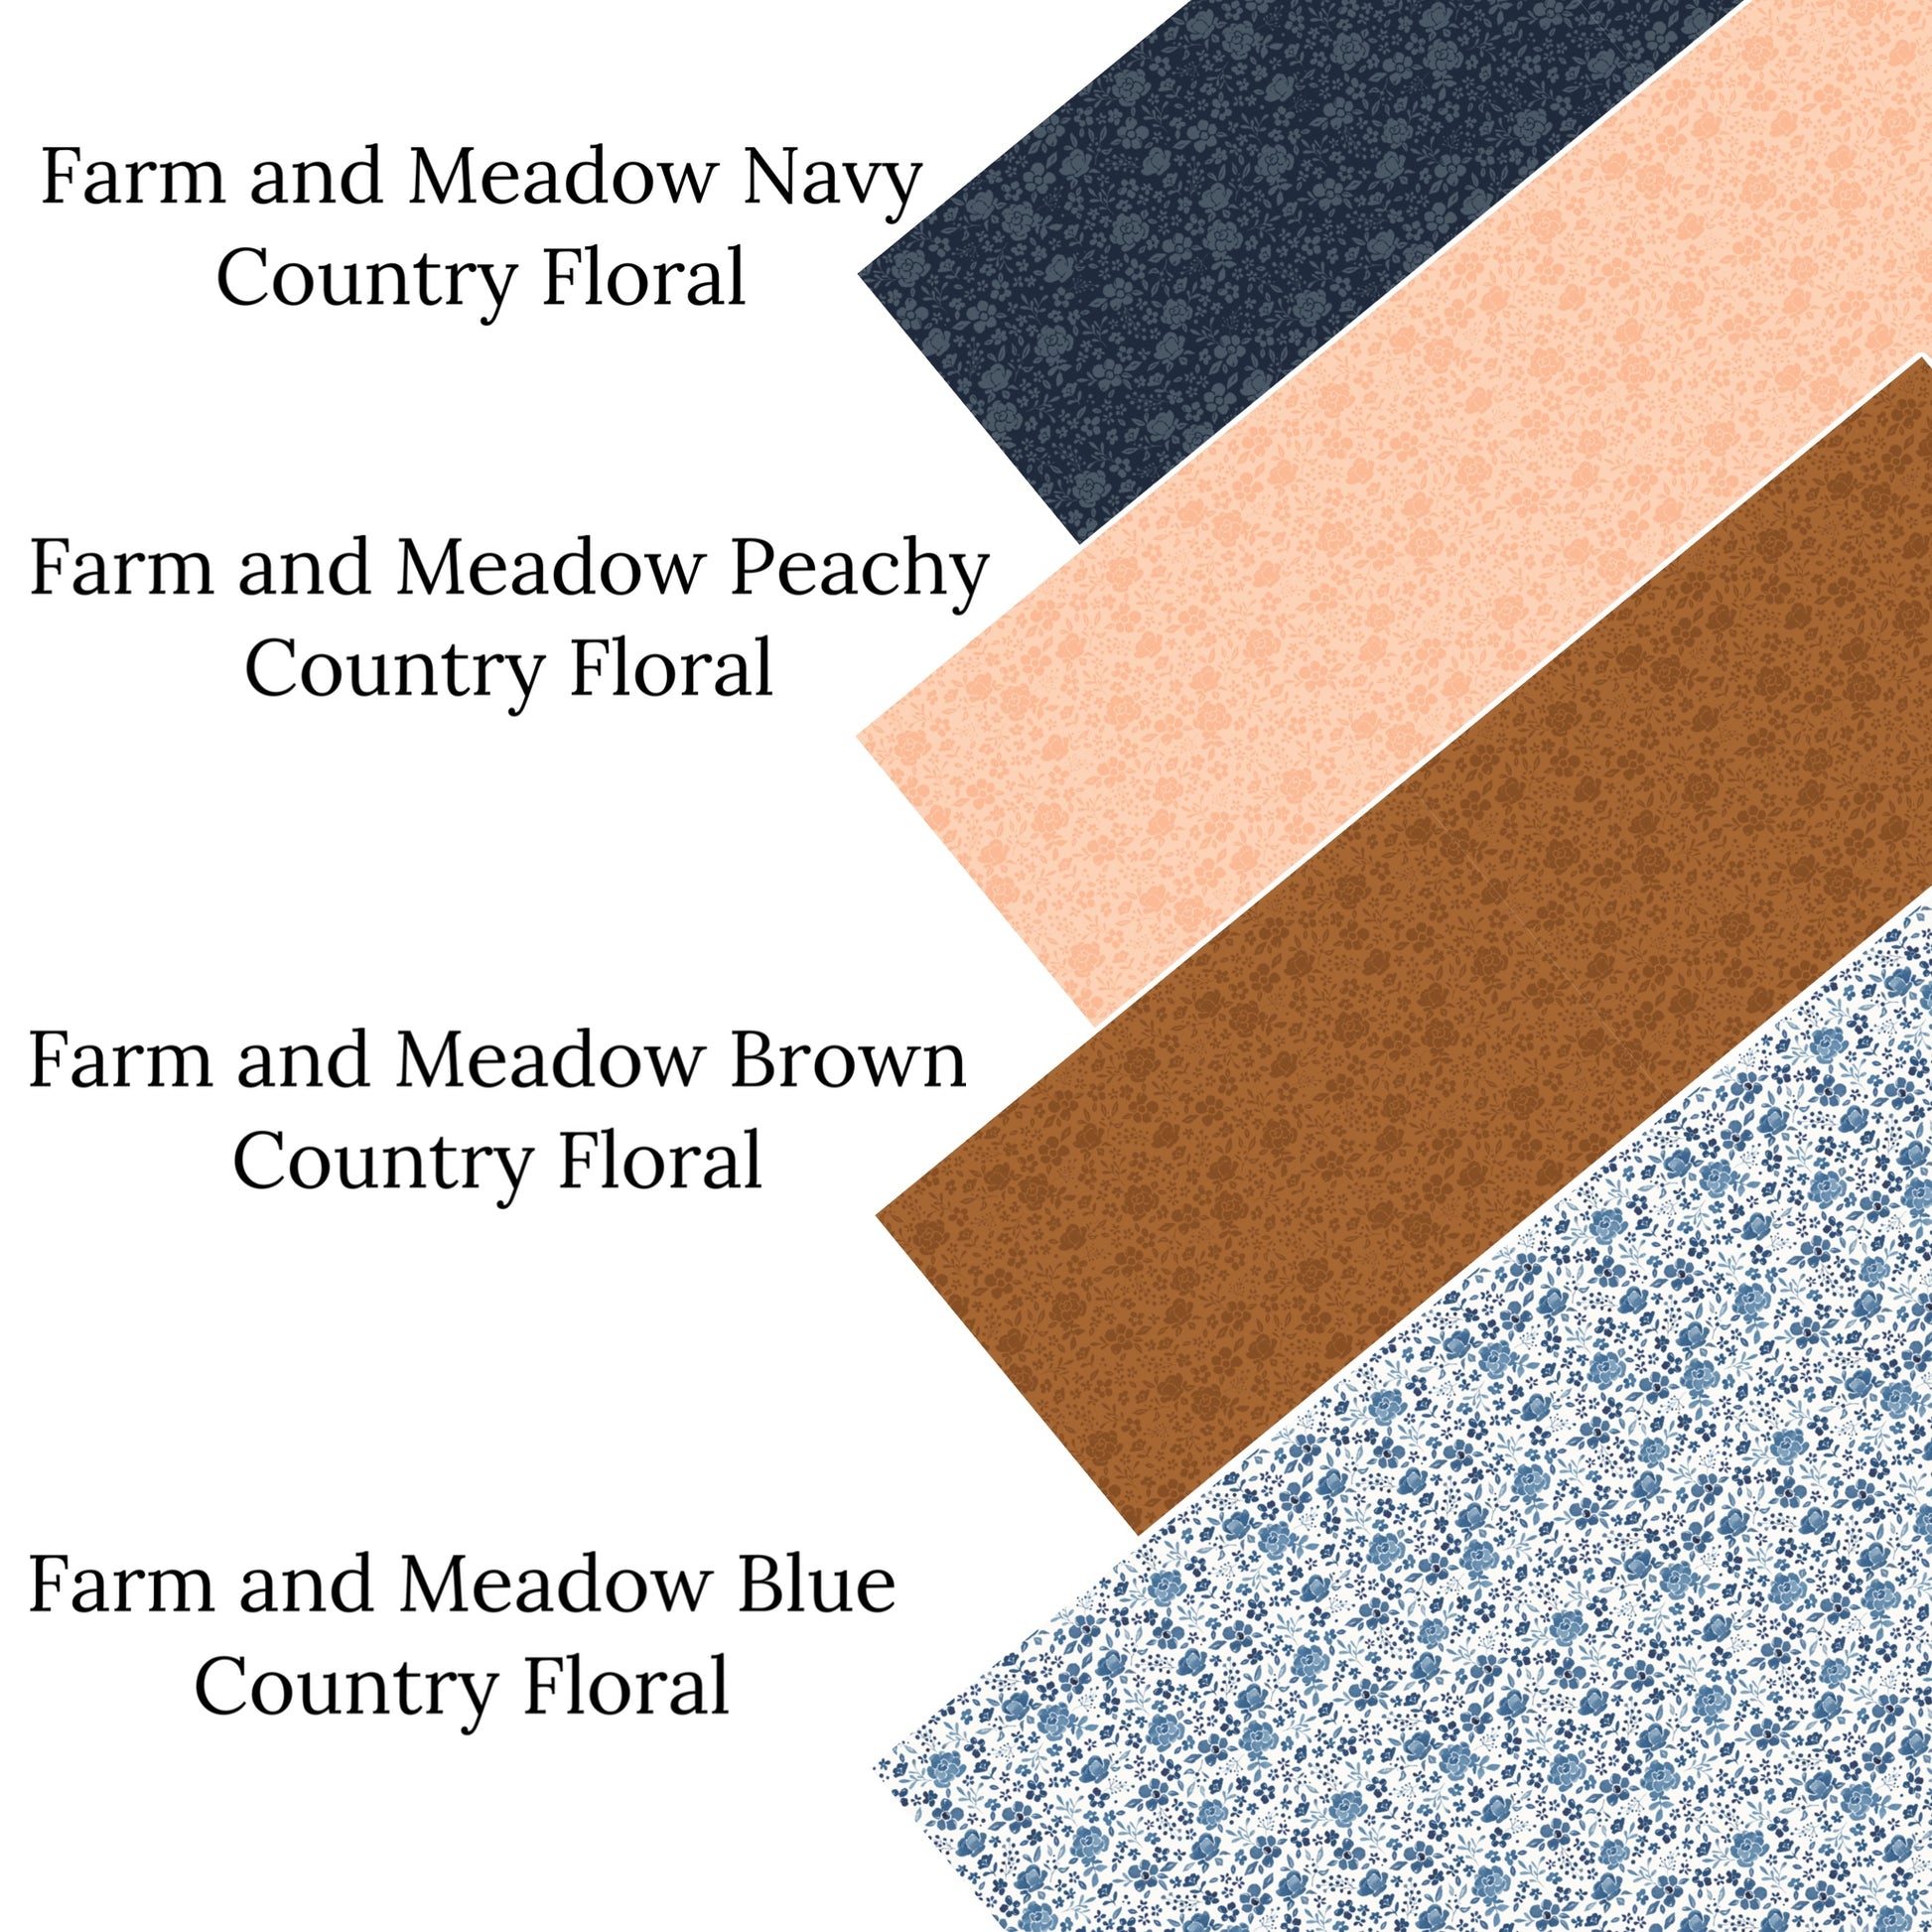 These spring and summer pattern faux leather sheets contain the following design elements: farm and meadow country floral patterns. Our CPSIA compliant faux leather sheets or rolls can be used for all types of crafting projects.